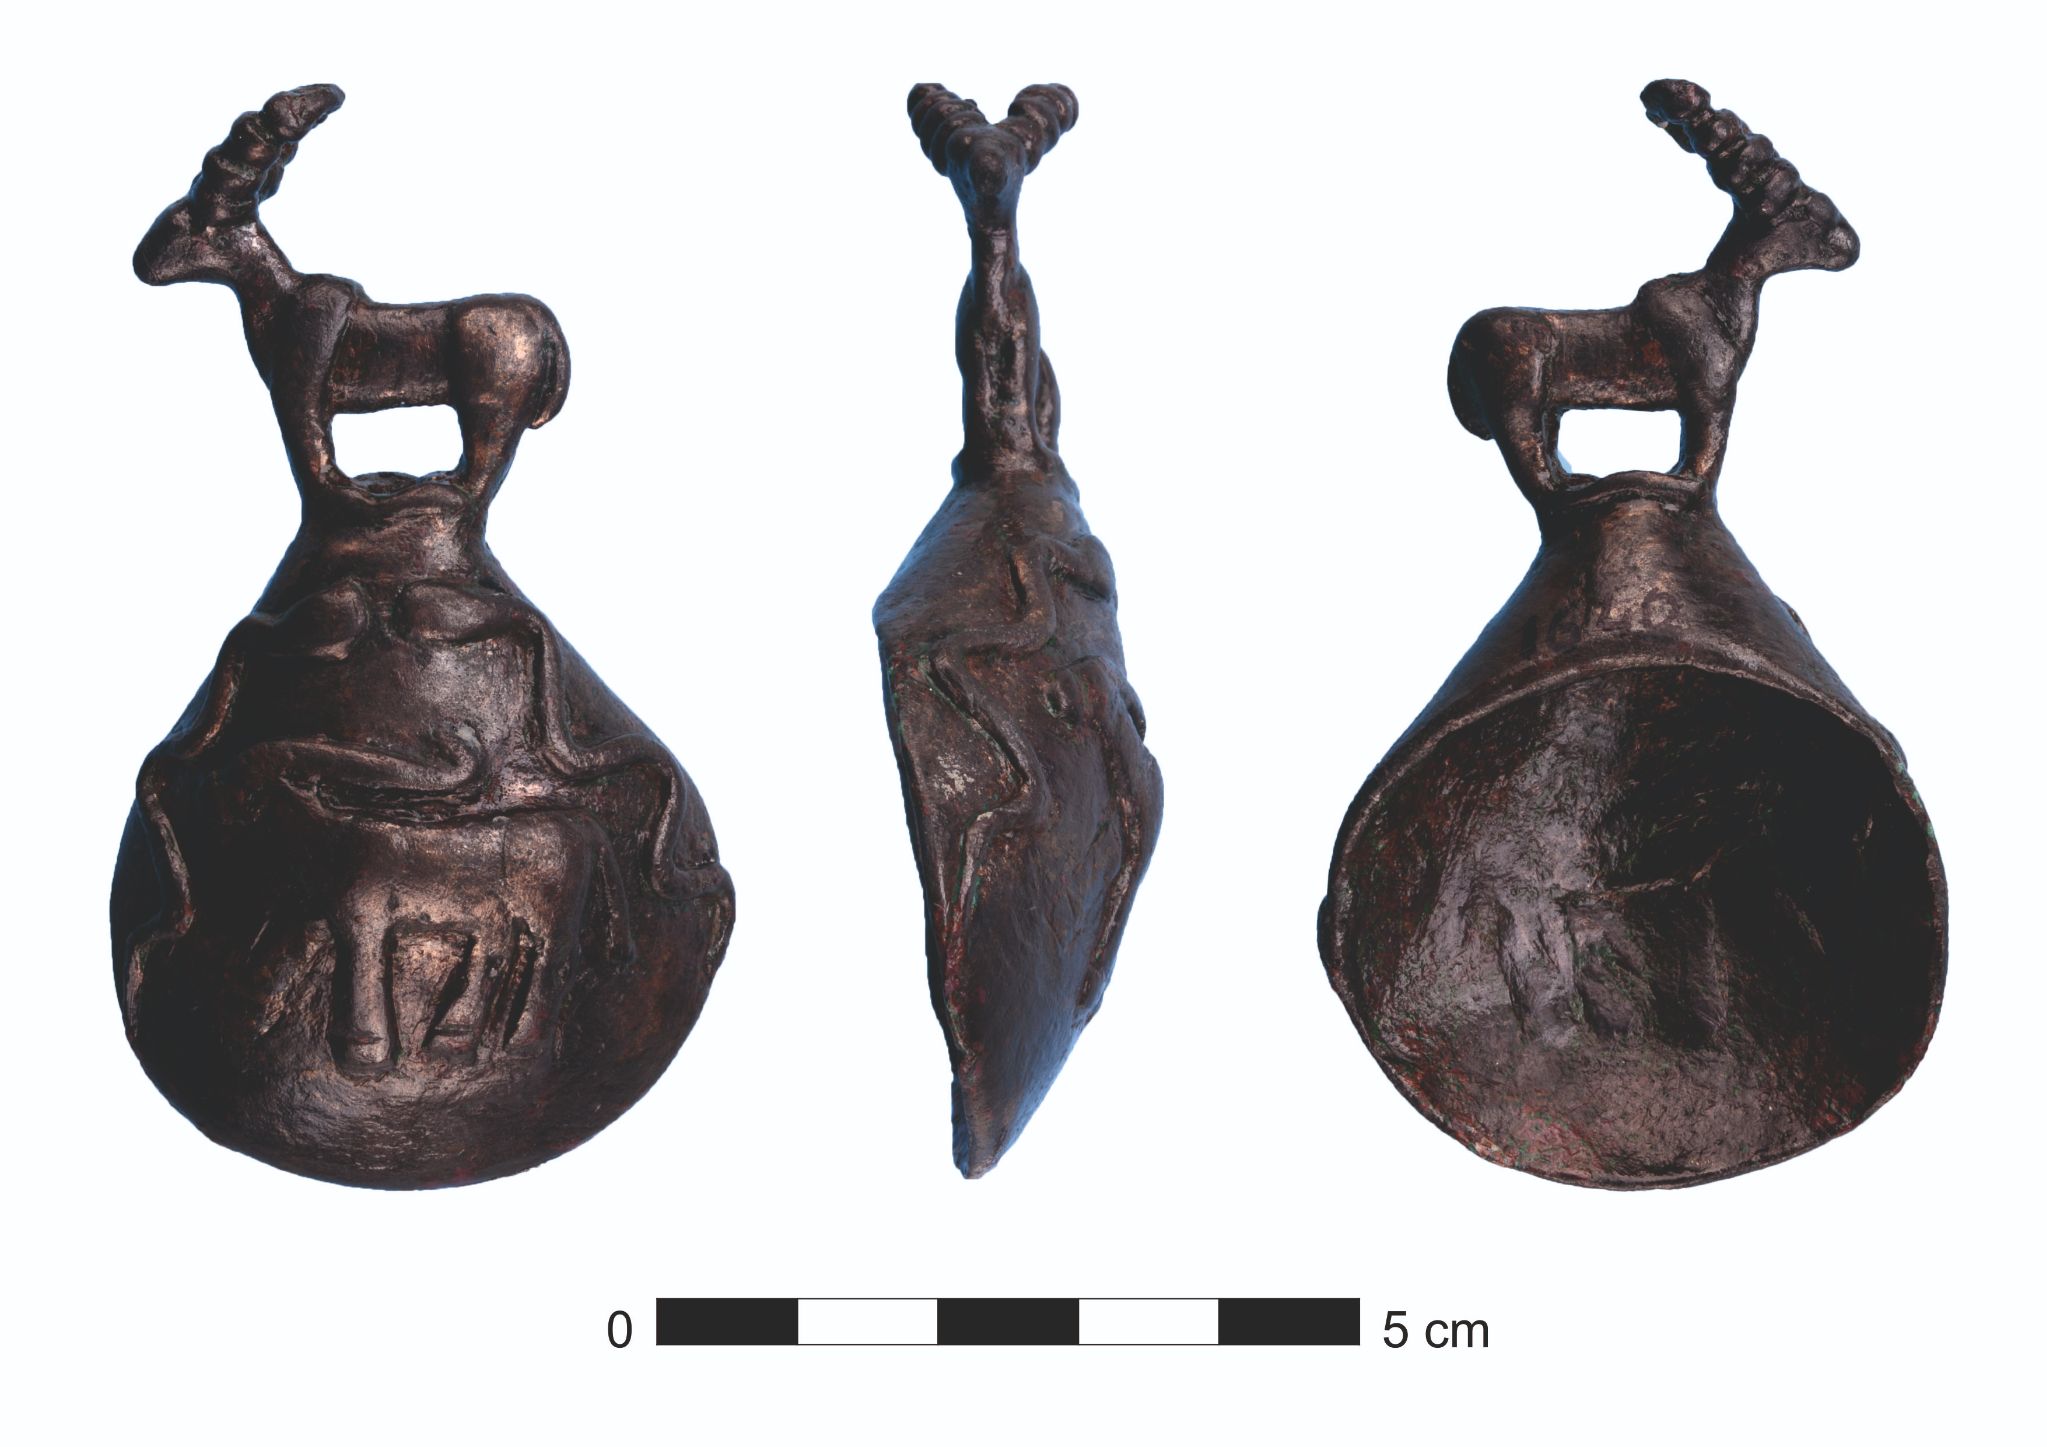 Hunter gatherer tools discovered at the archaeological site are indicative of an Early Bronze Age community (Haluk Saglamtimur)